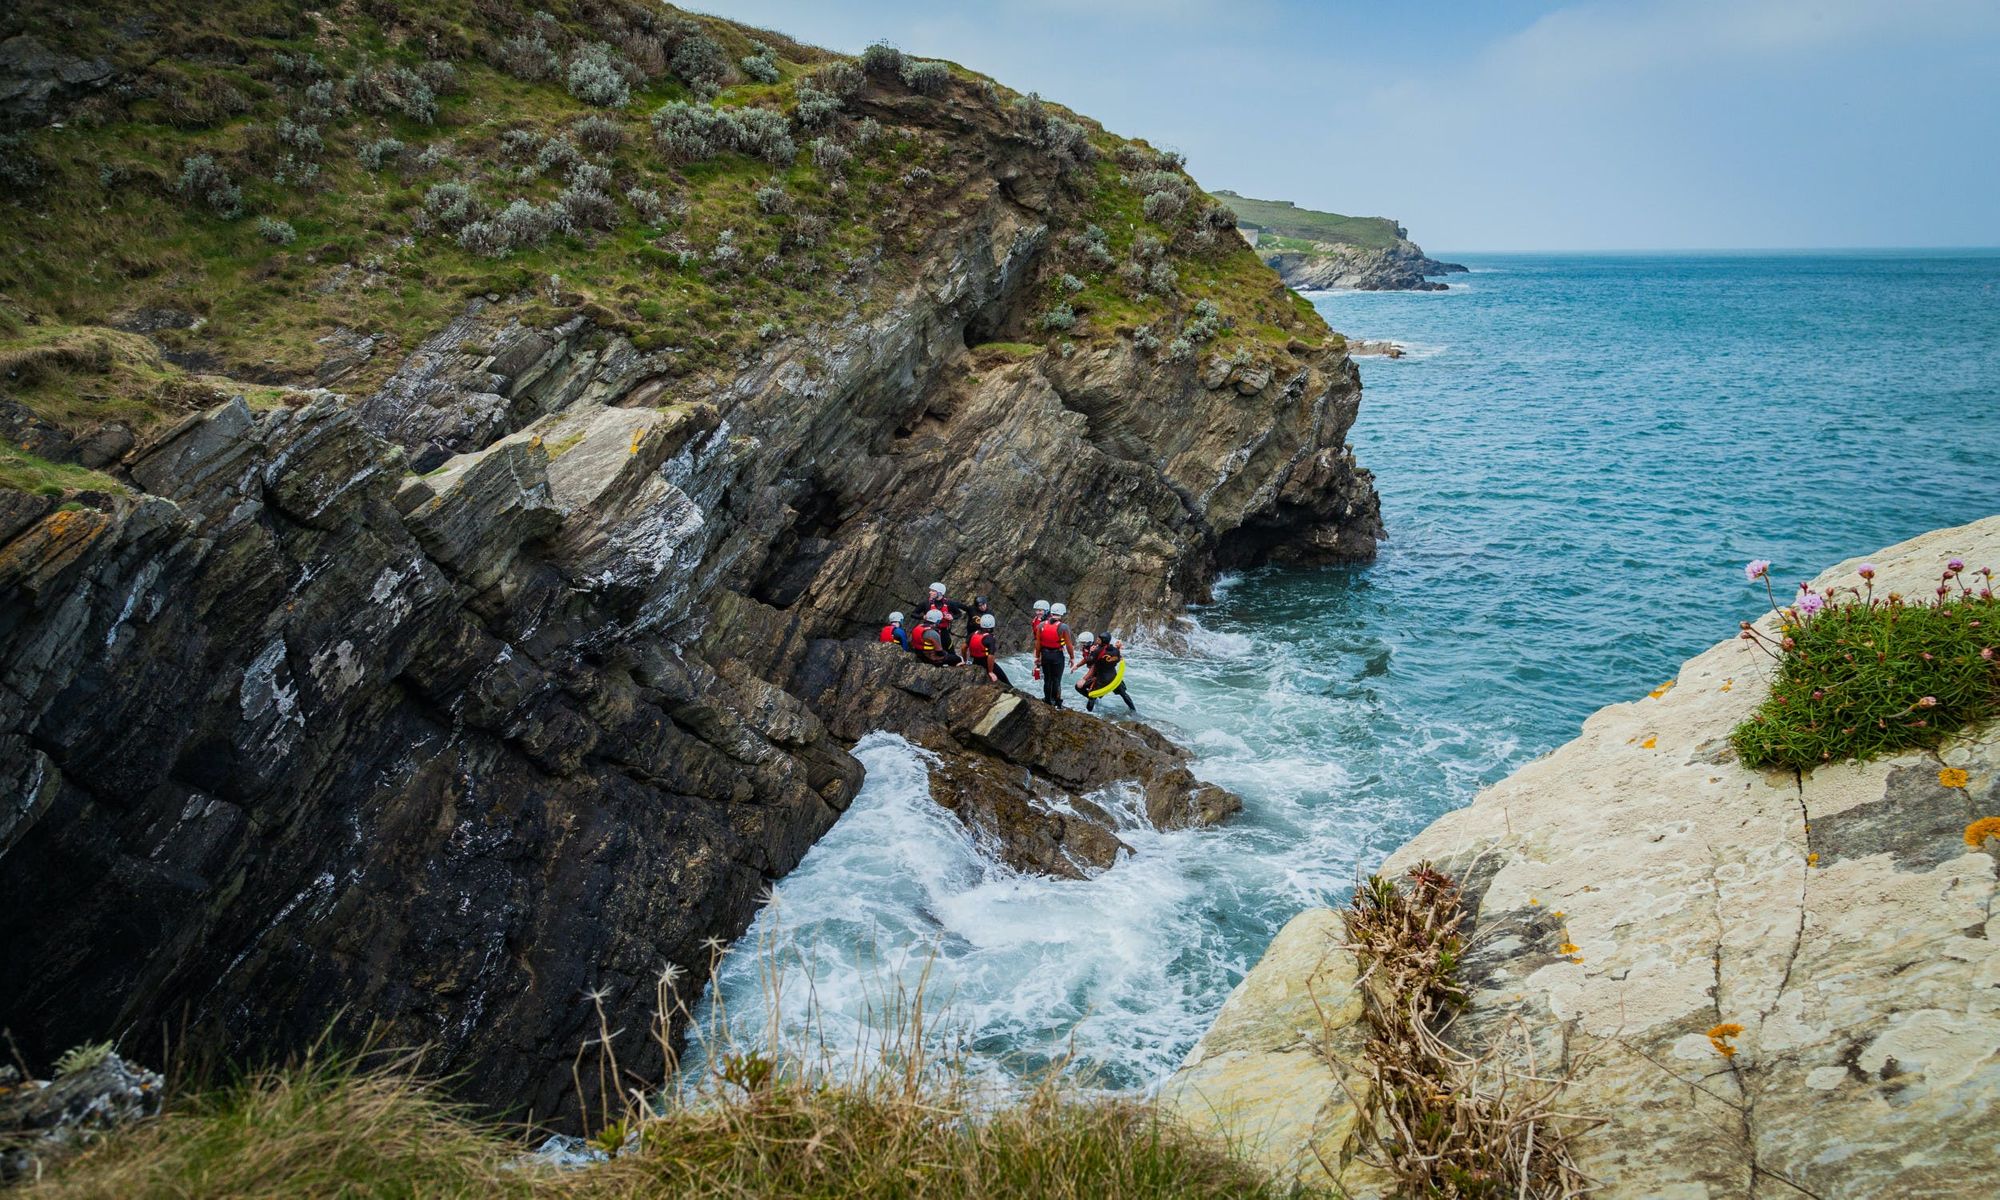 A coasteering group in Cornwall gathered on rugged rocks, down by the ocean.